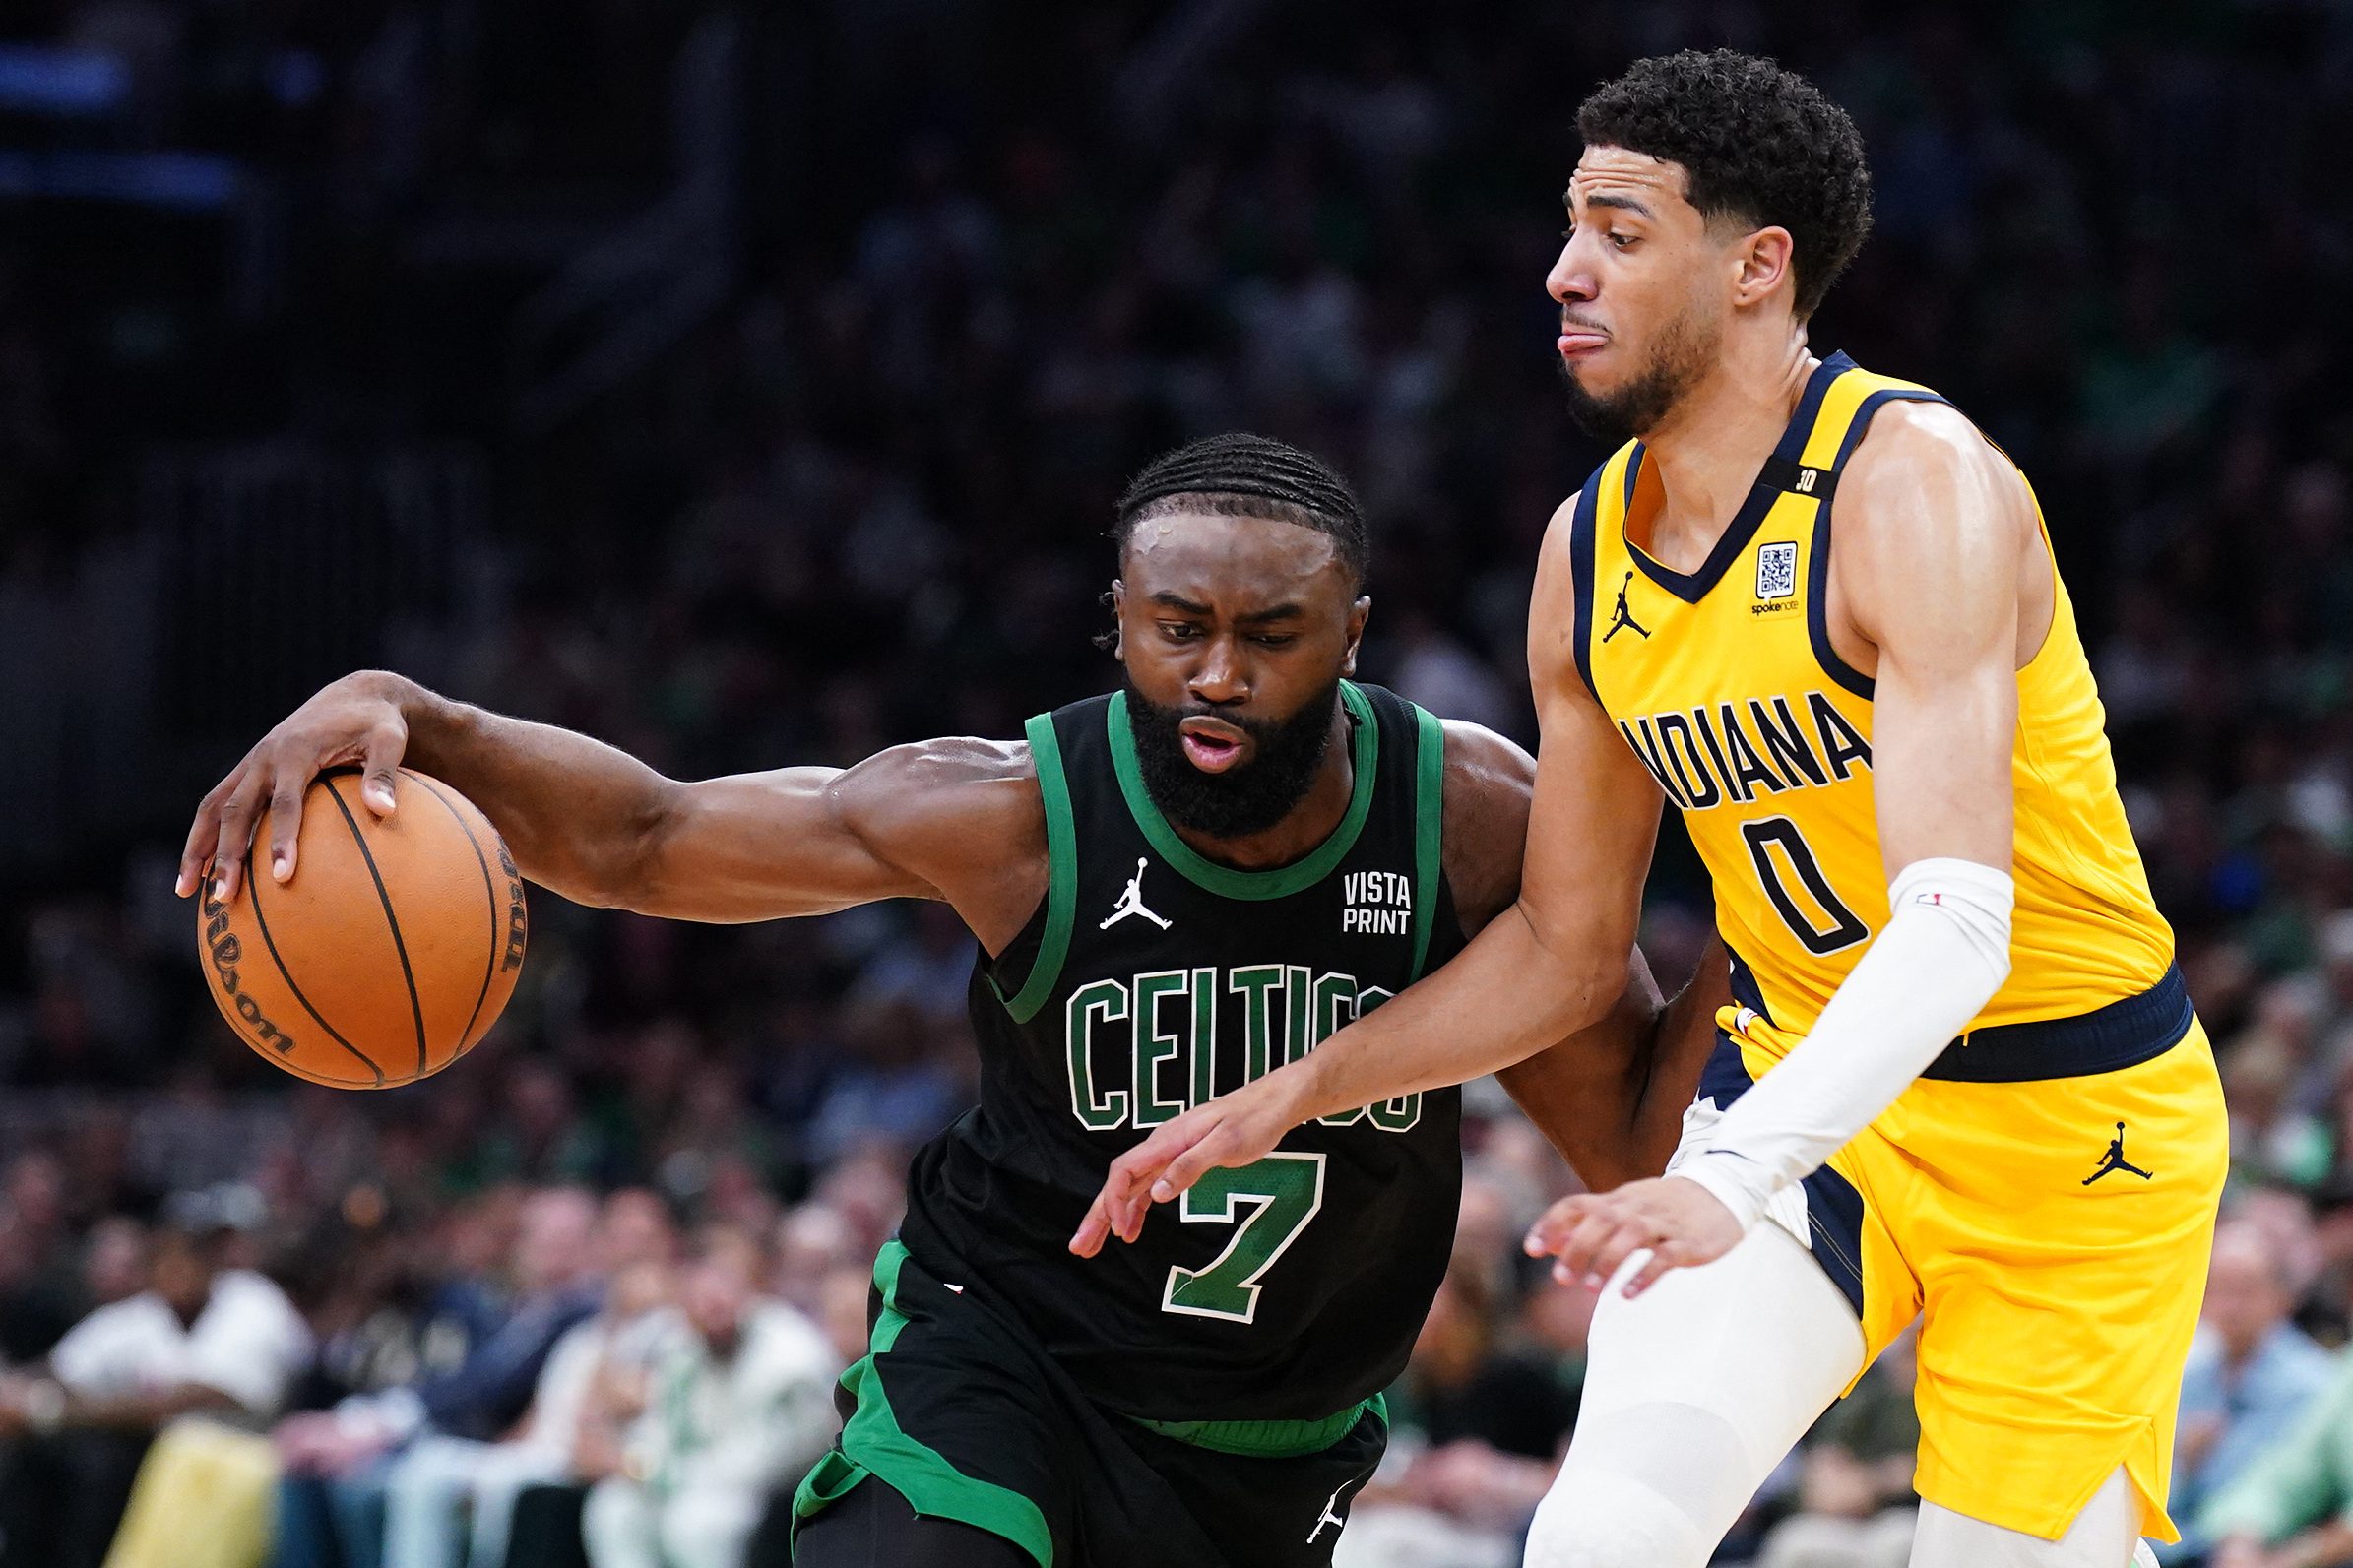 Big 40: Jaylen Brown on fire, powers Celtics to 2-0 lead over Pacers